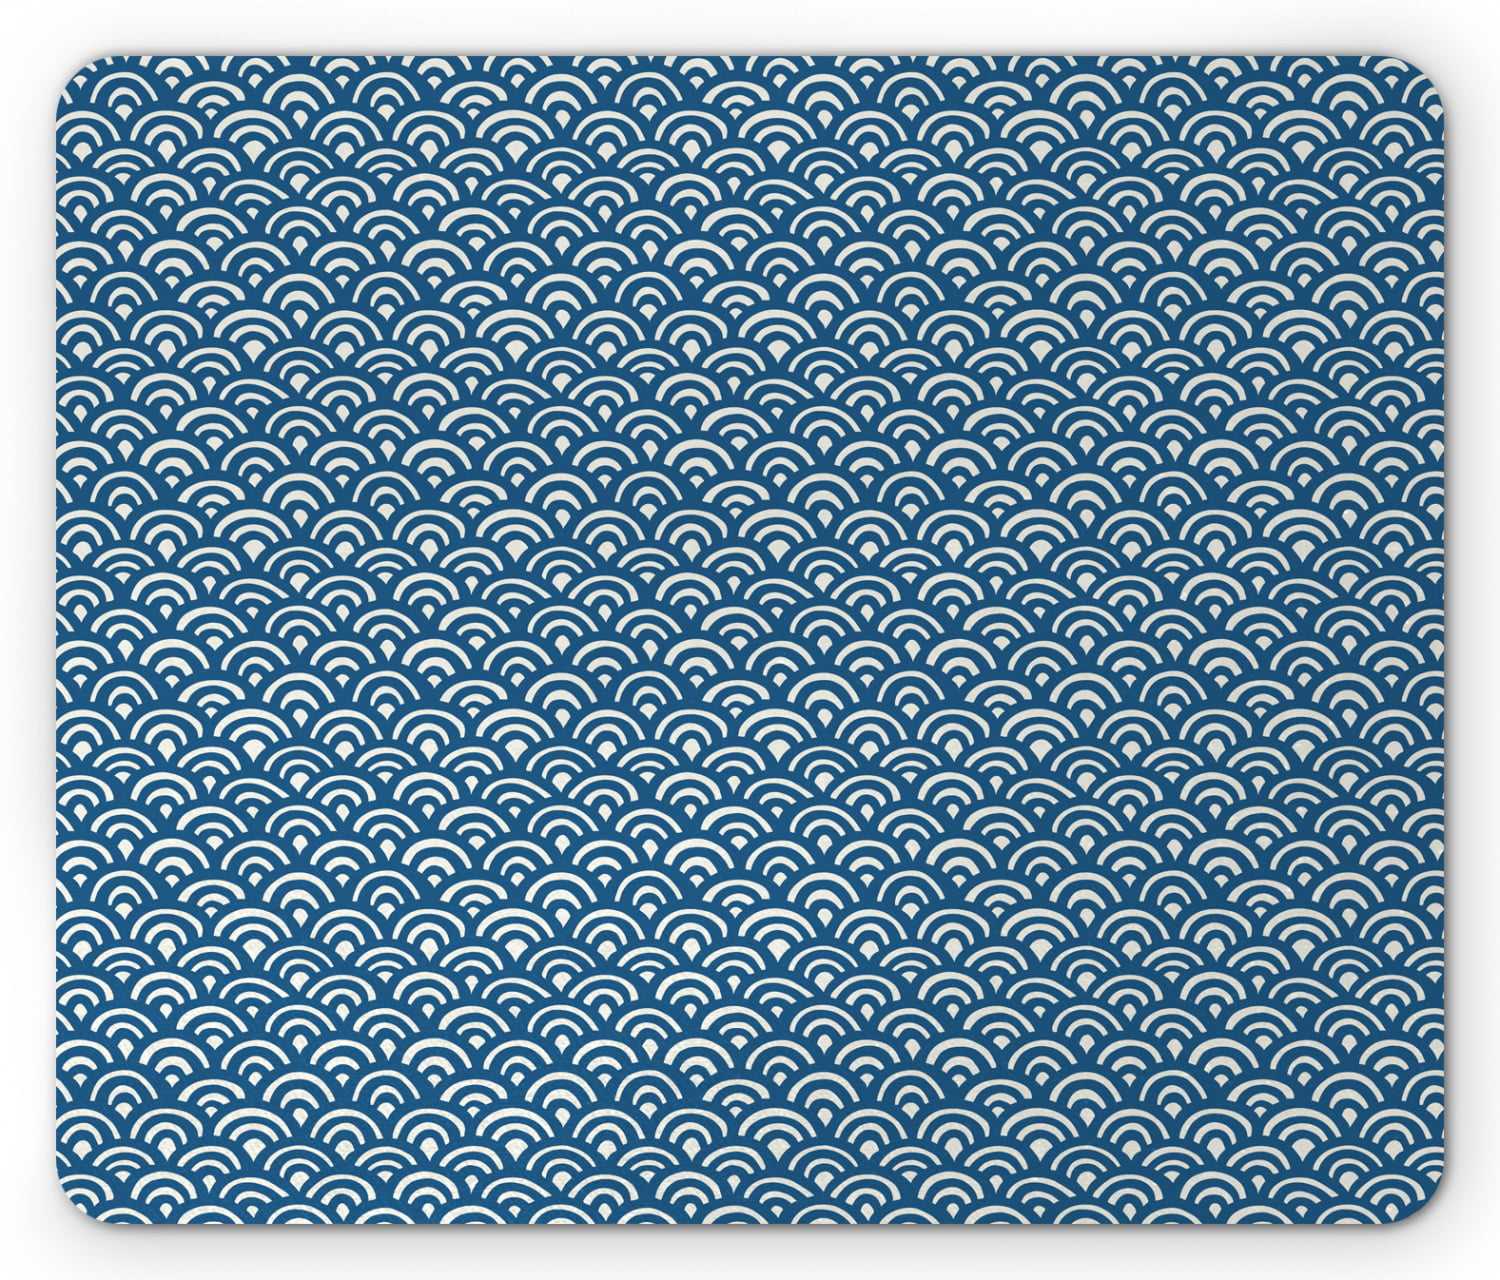 Blue Nautical Mouse Pad, Continuing Print of Concentric Half Circles ...